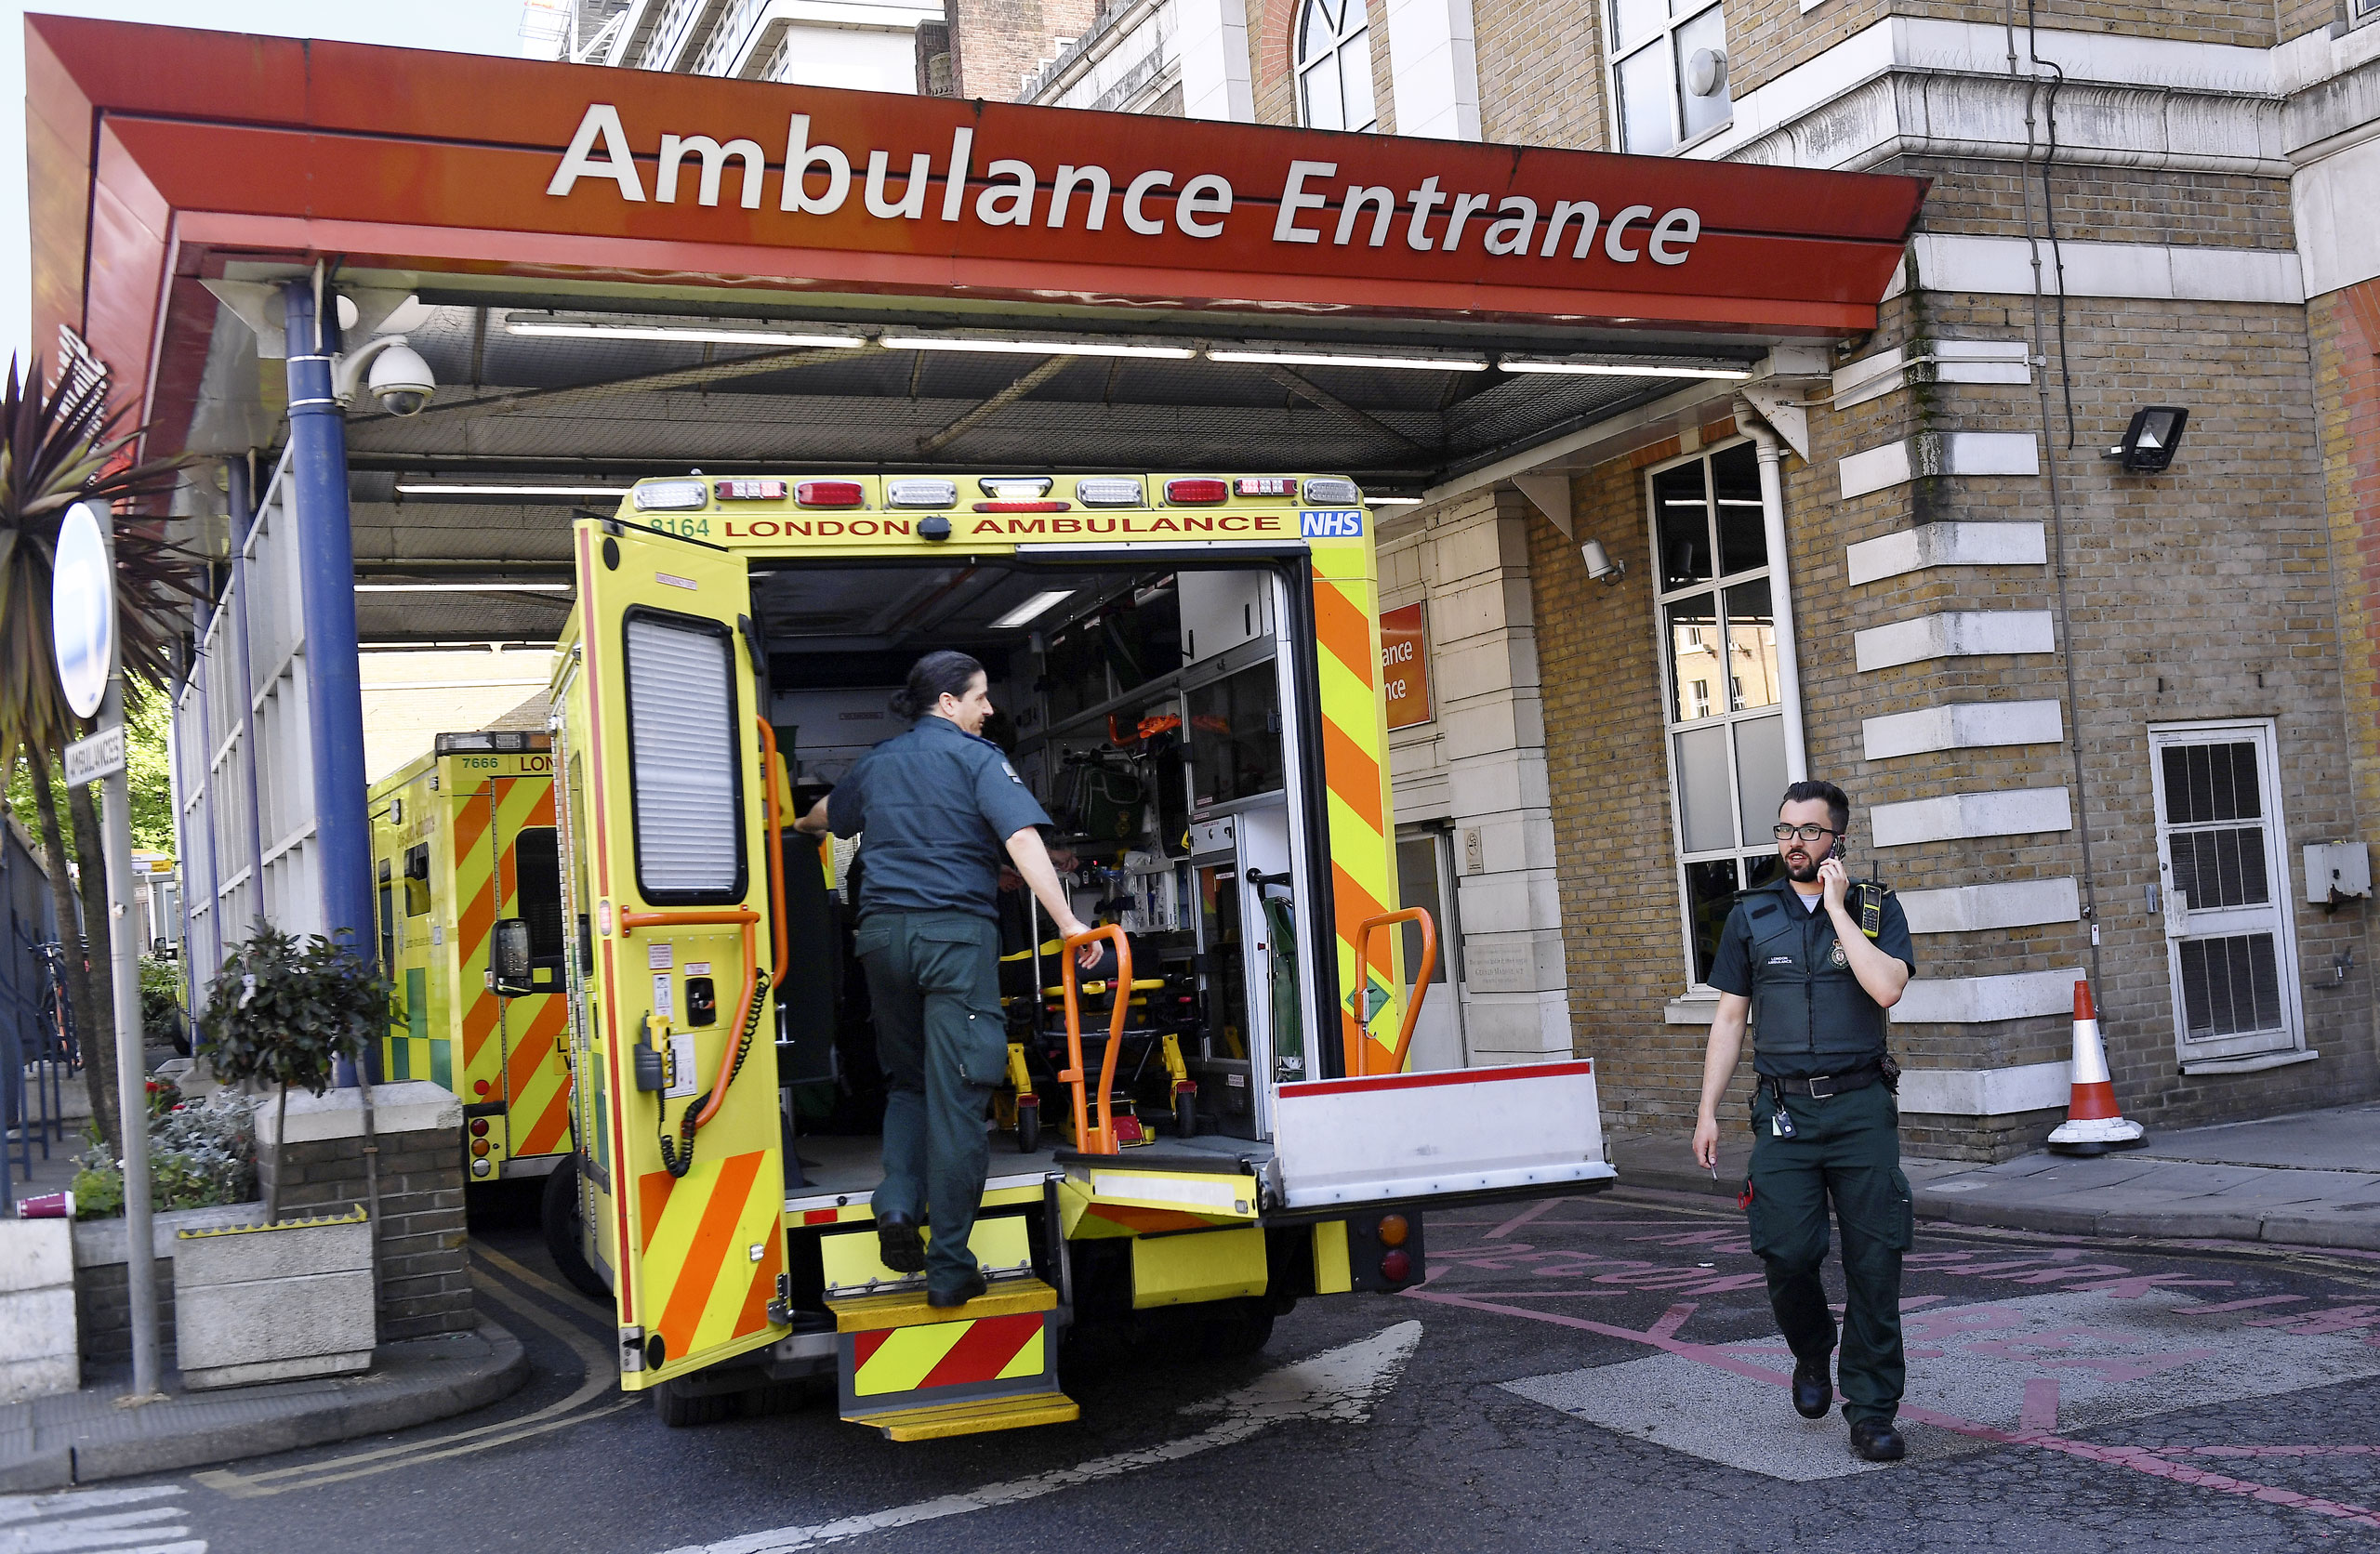 The cyberattack stalled computer systems worldwide, including those at several hospitals across England (Andy Rain—EPA/Redux)